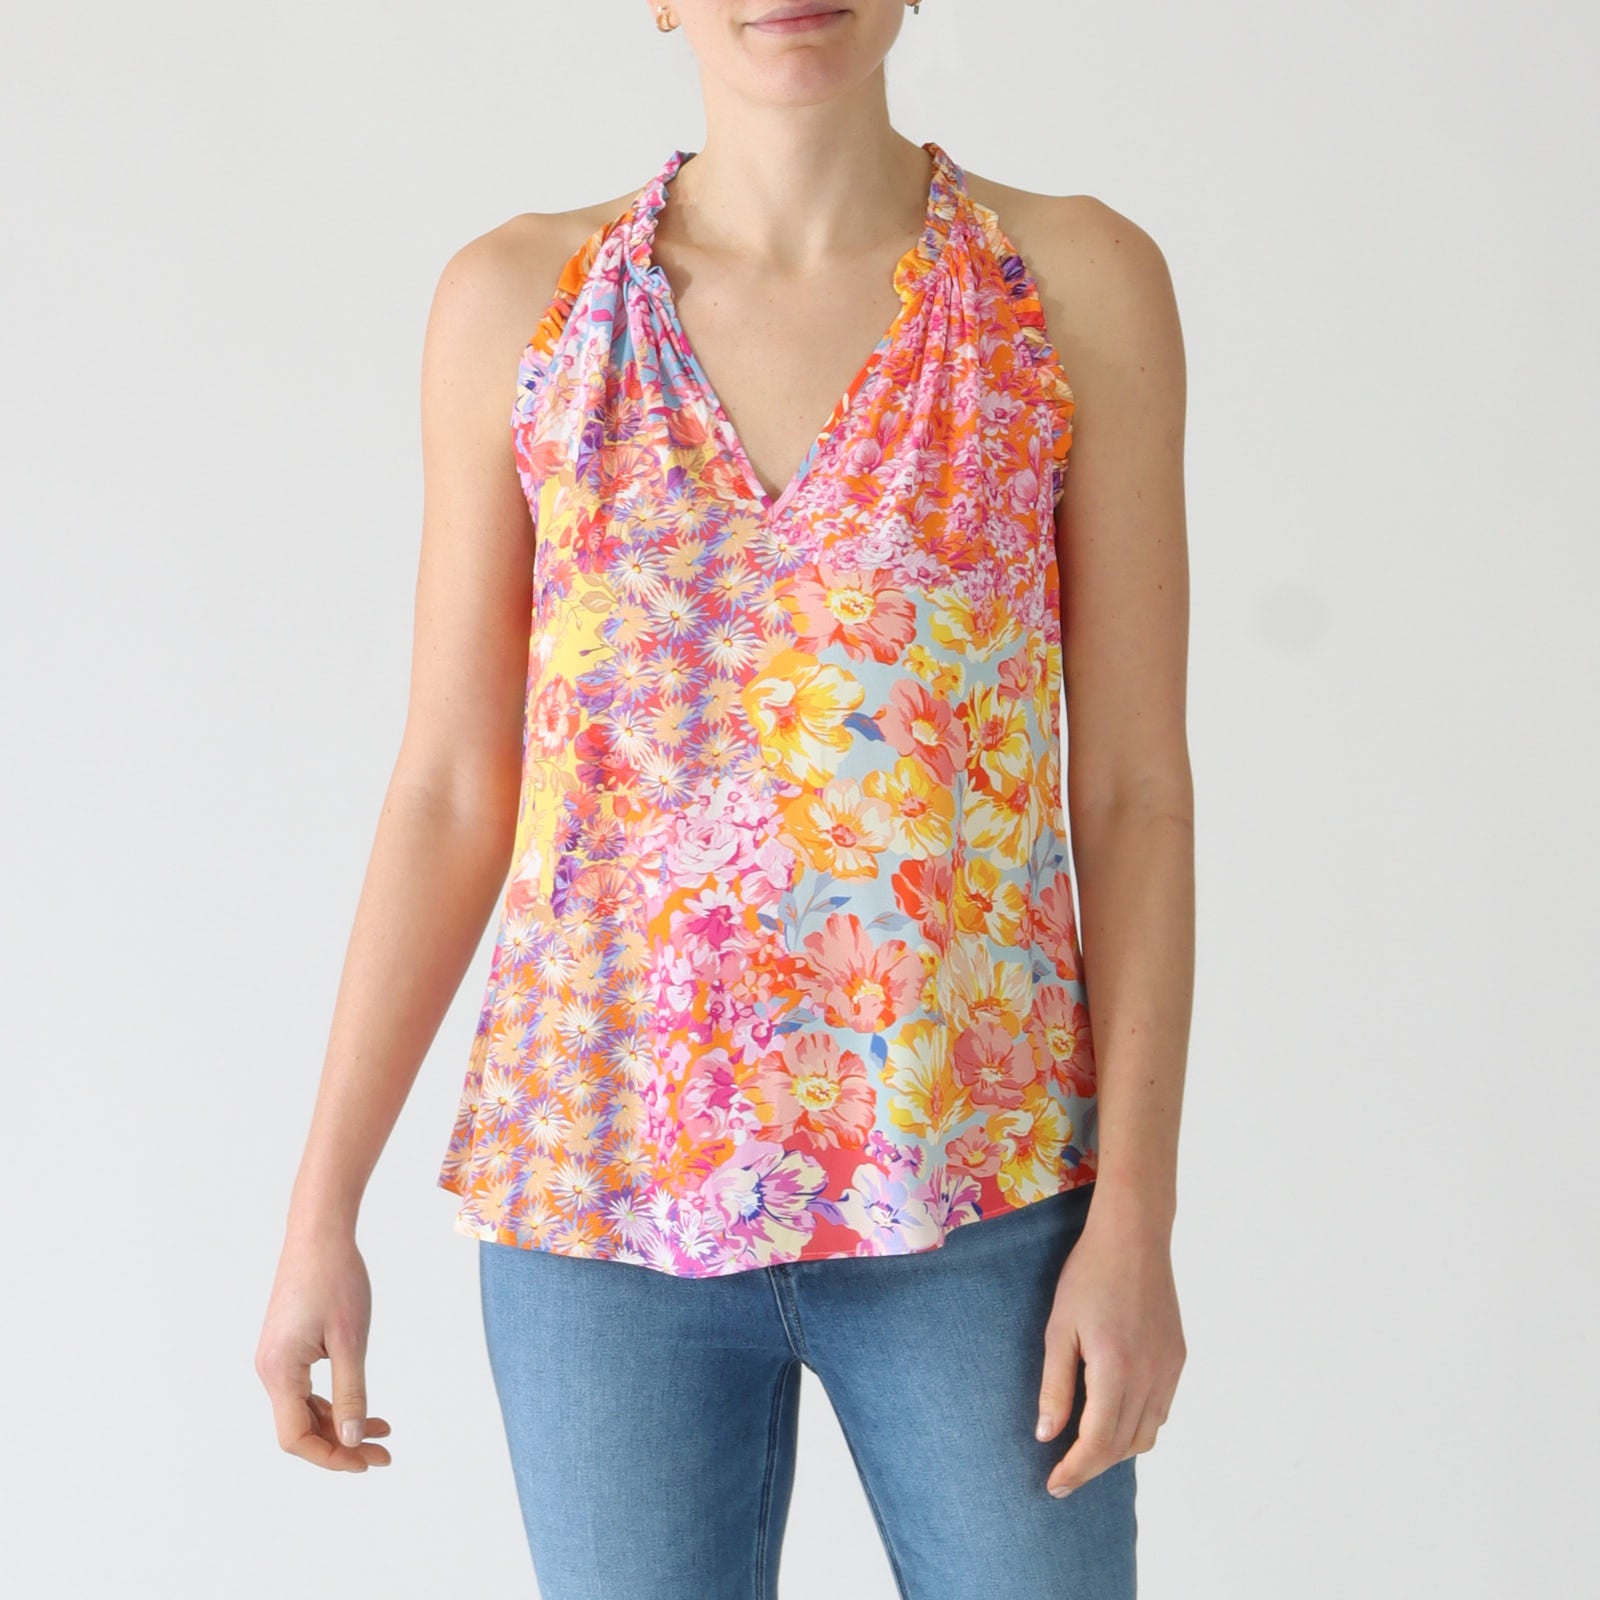 Adeline Coral Floral Print Sleeveless Top